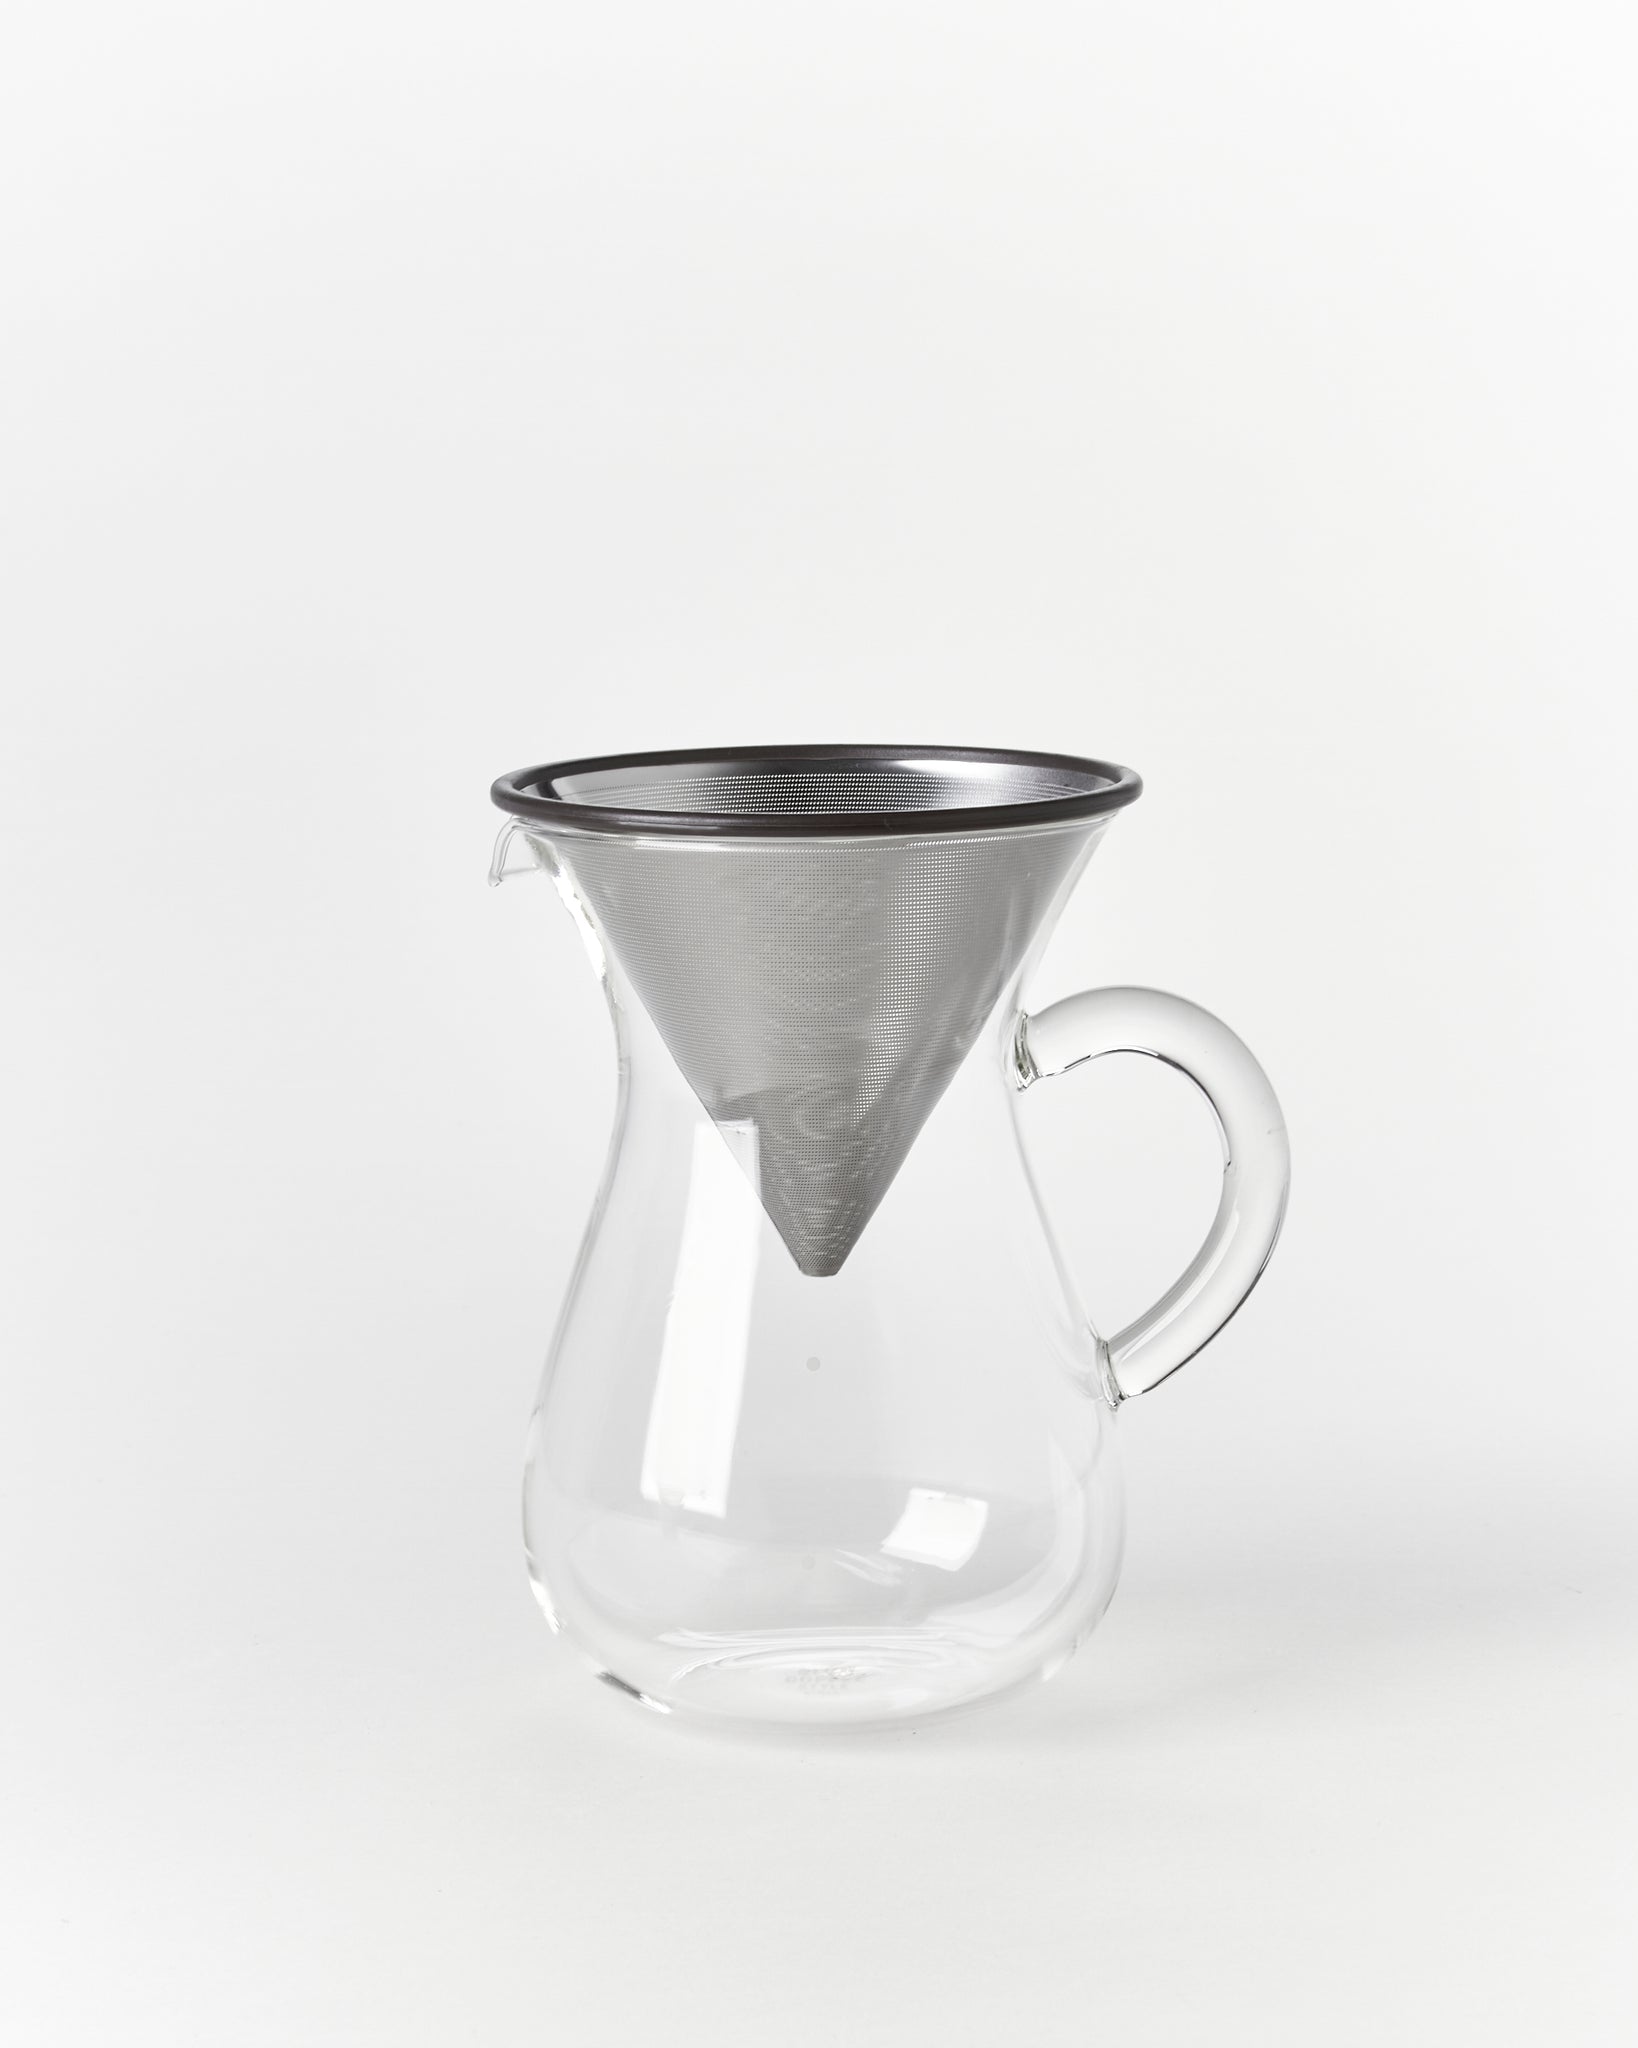 SCS Coffee Carafe Set, 4 Cups